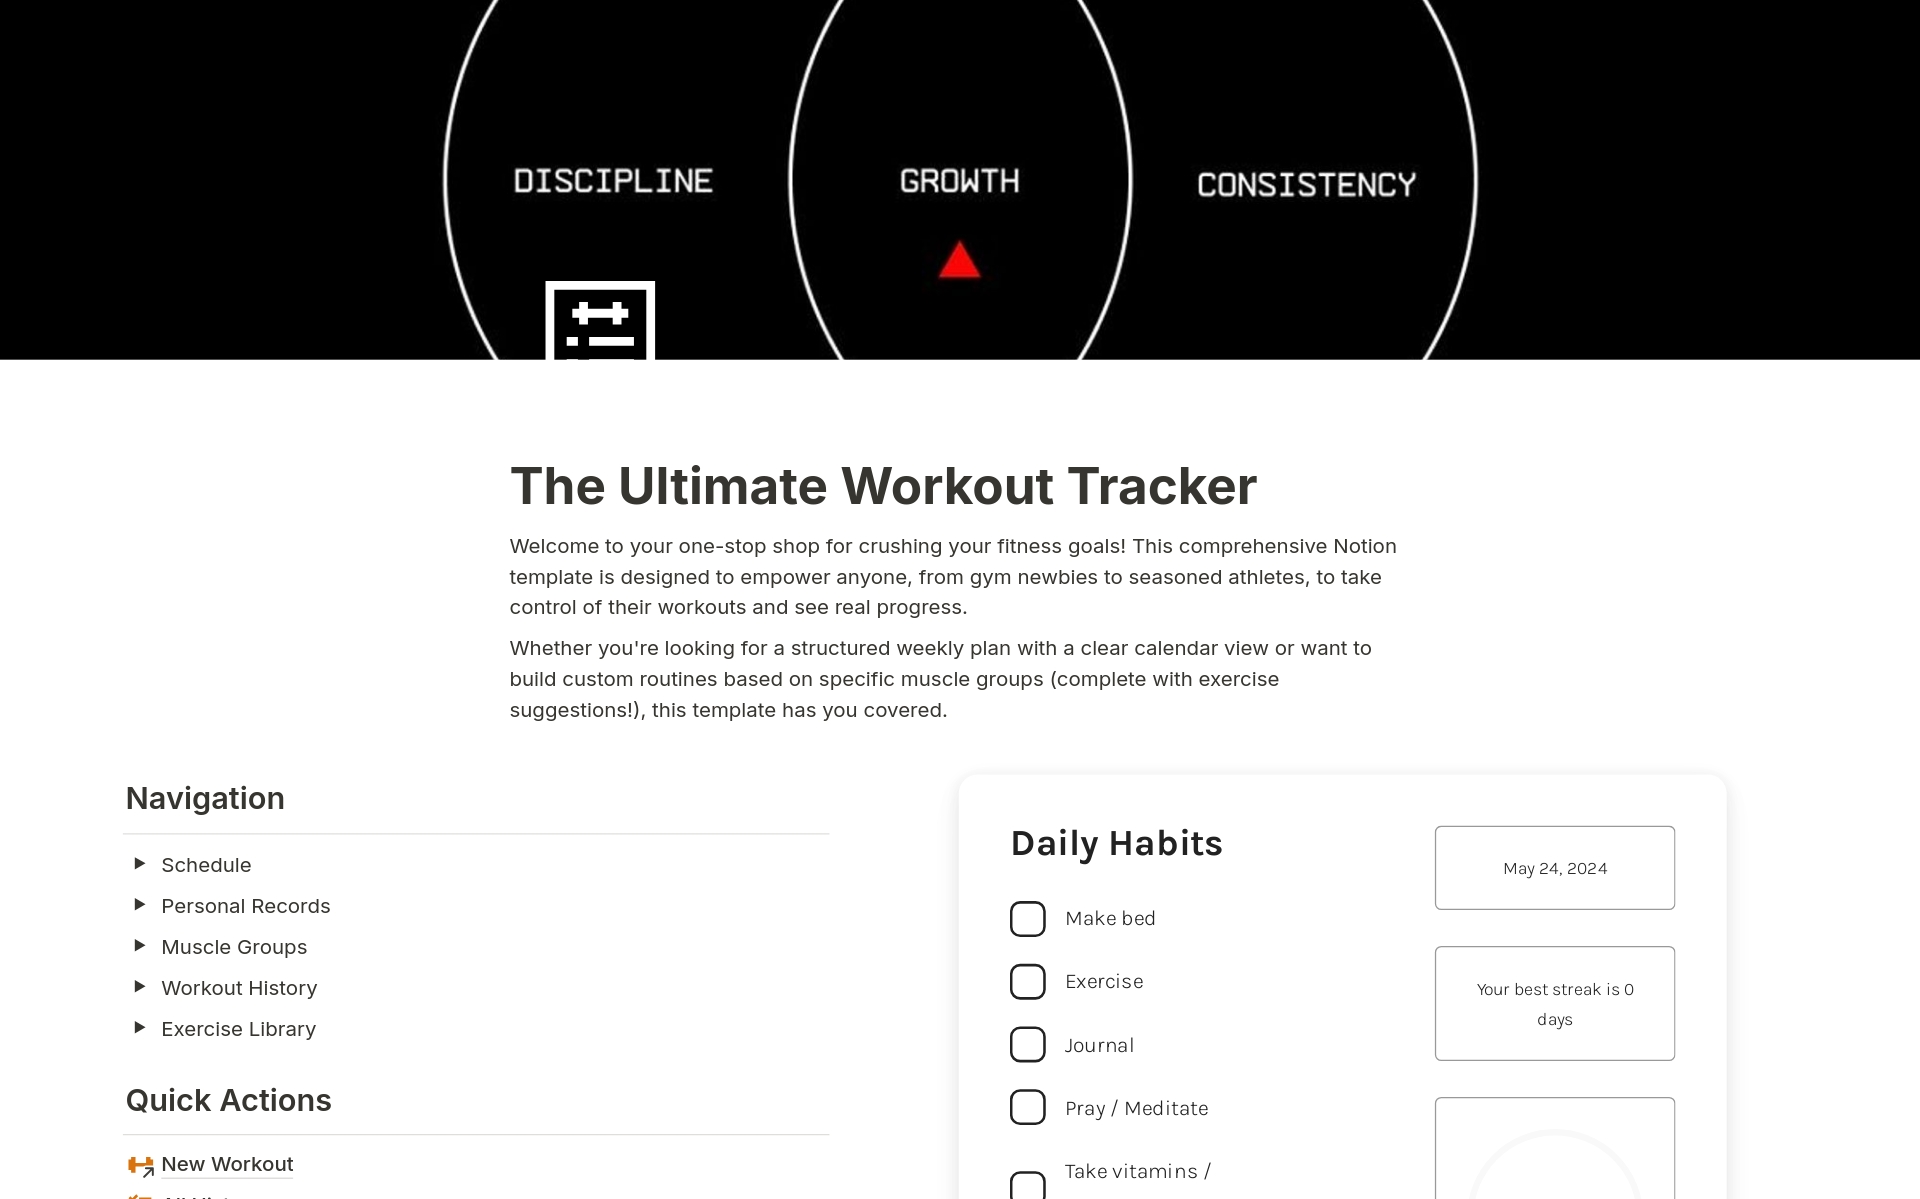 This comprehensive Notion template is designed to empower anyone, from gym newbies to seasoned athletes, to take control of their workouts and see real progress.